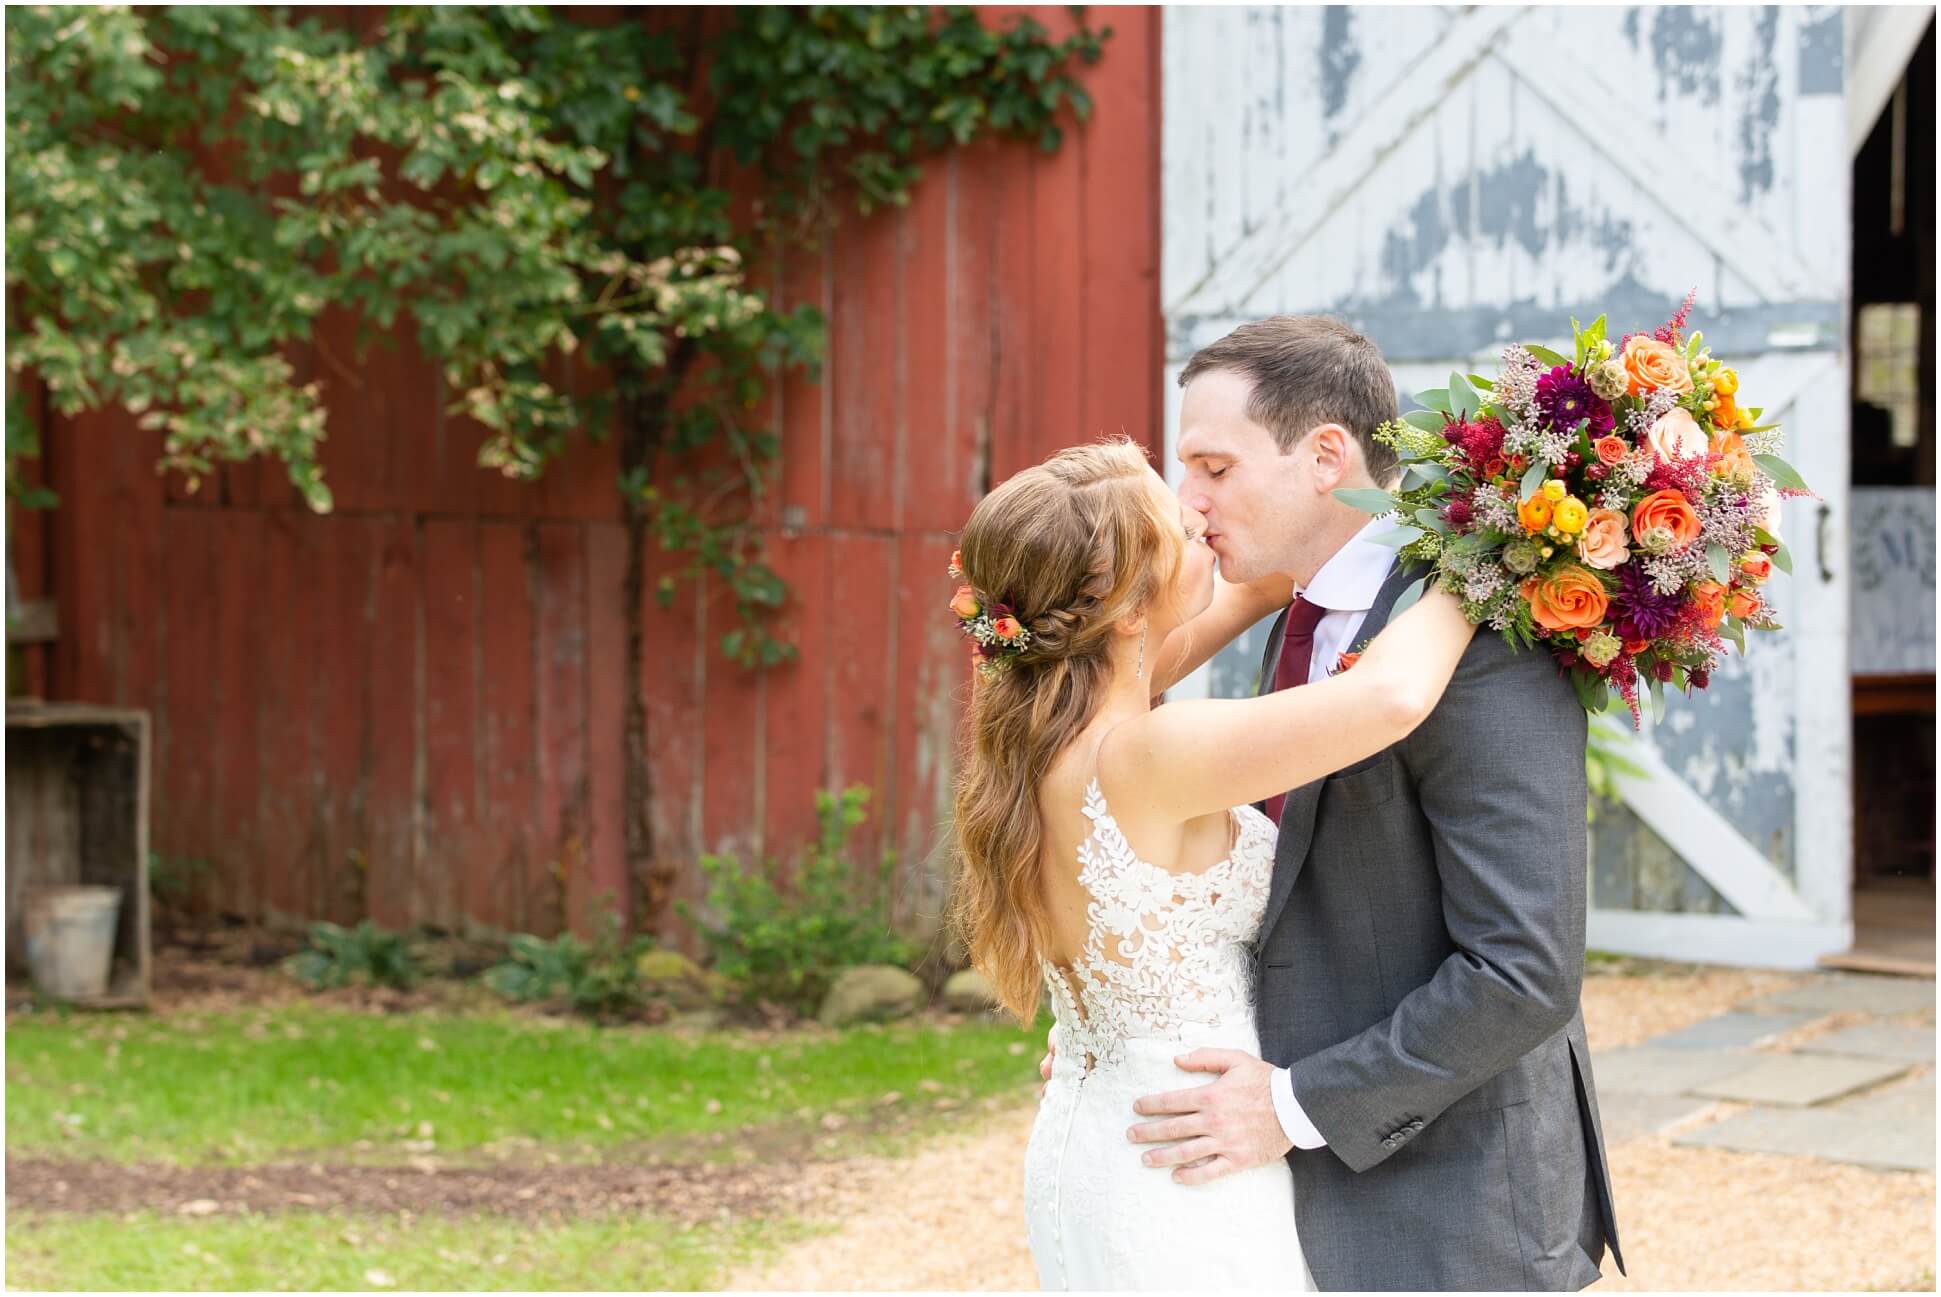 BRIDE AND GROOM IN FRONT OF THE BARN